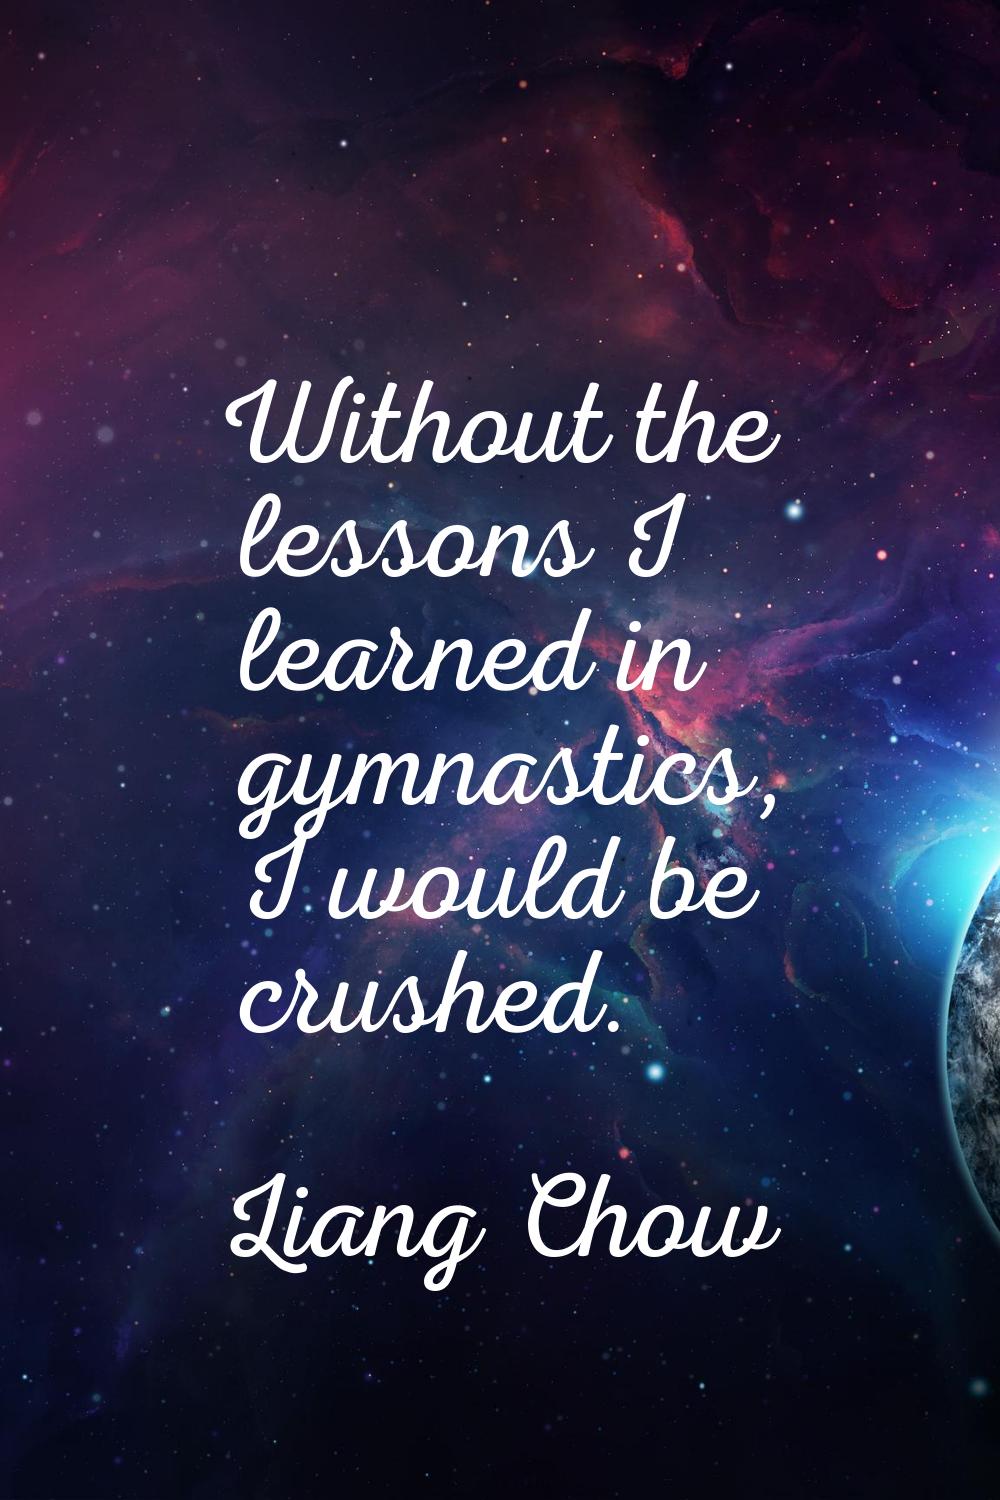 Without the lessons I learned in gymnastics, I would be crushed.